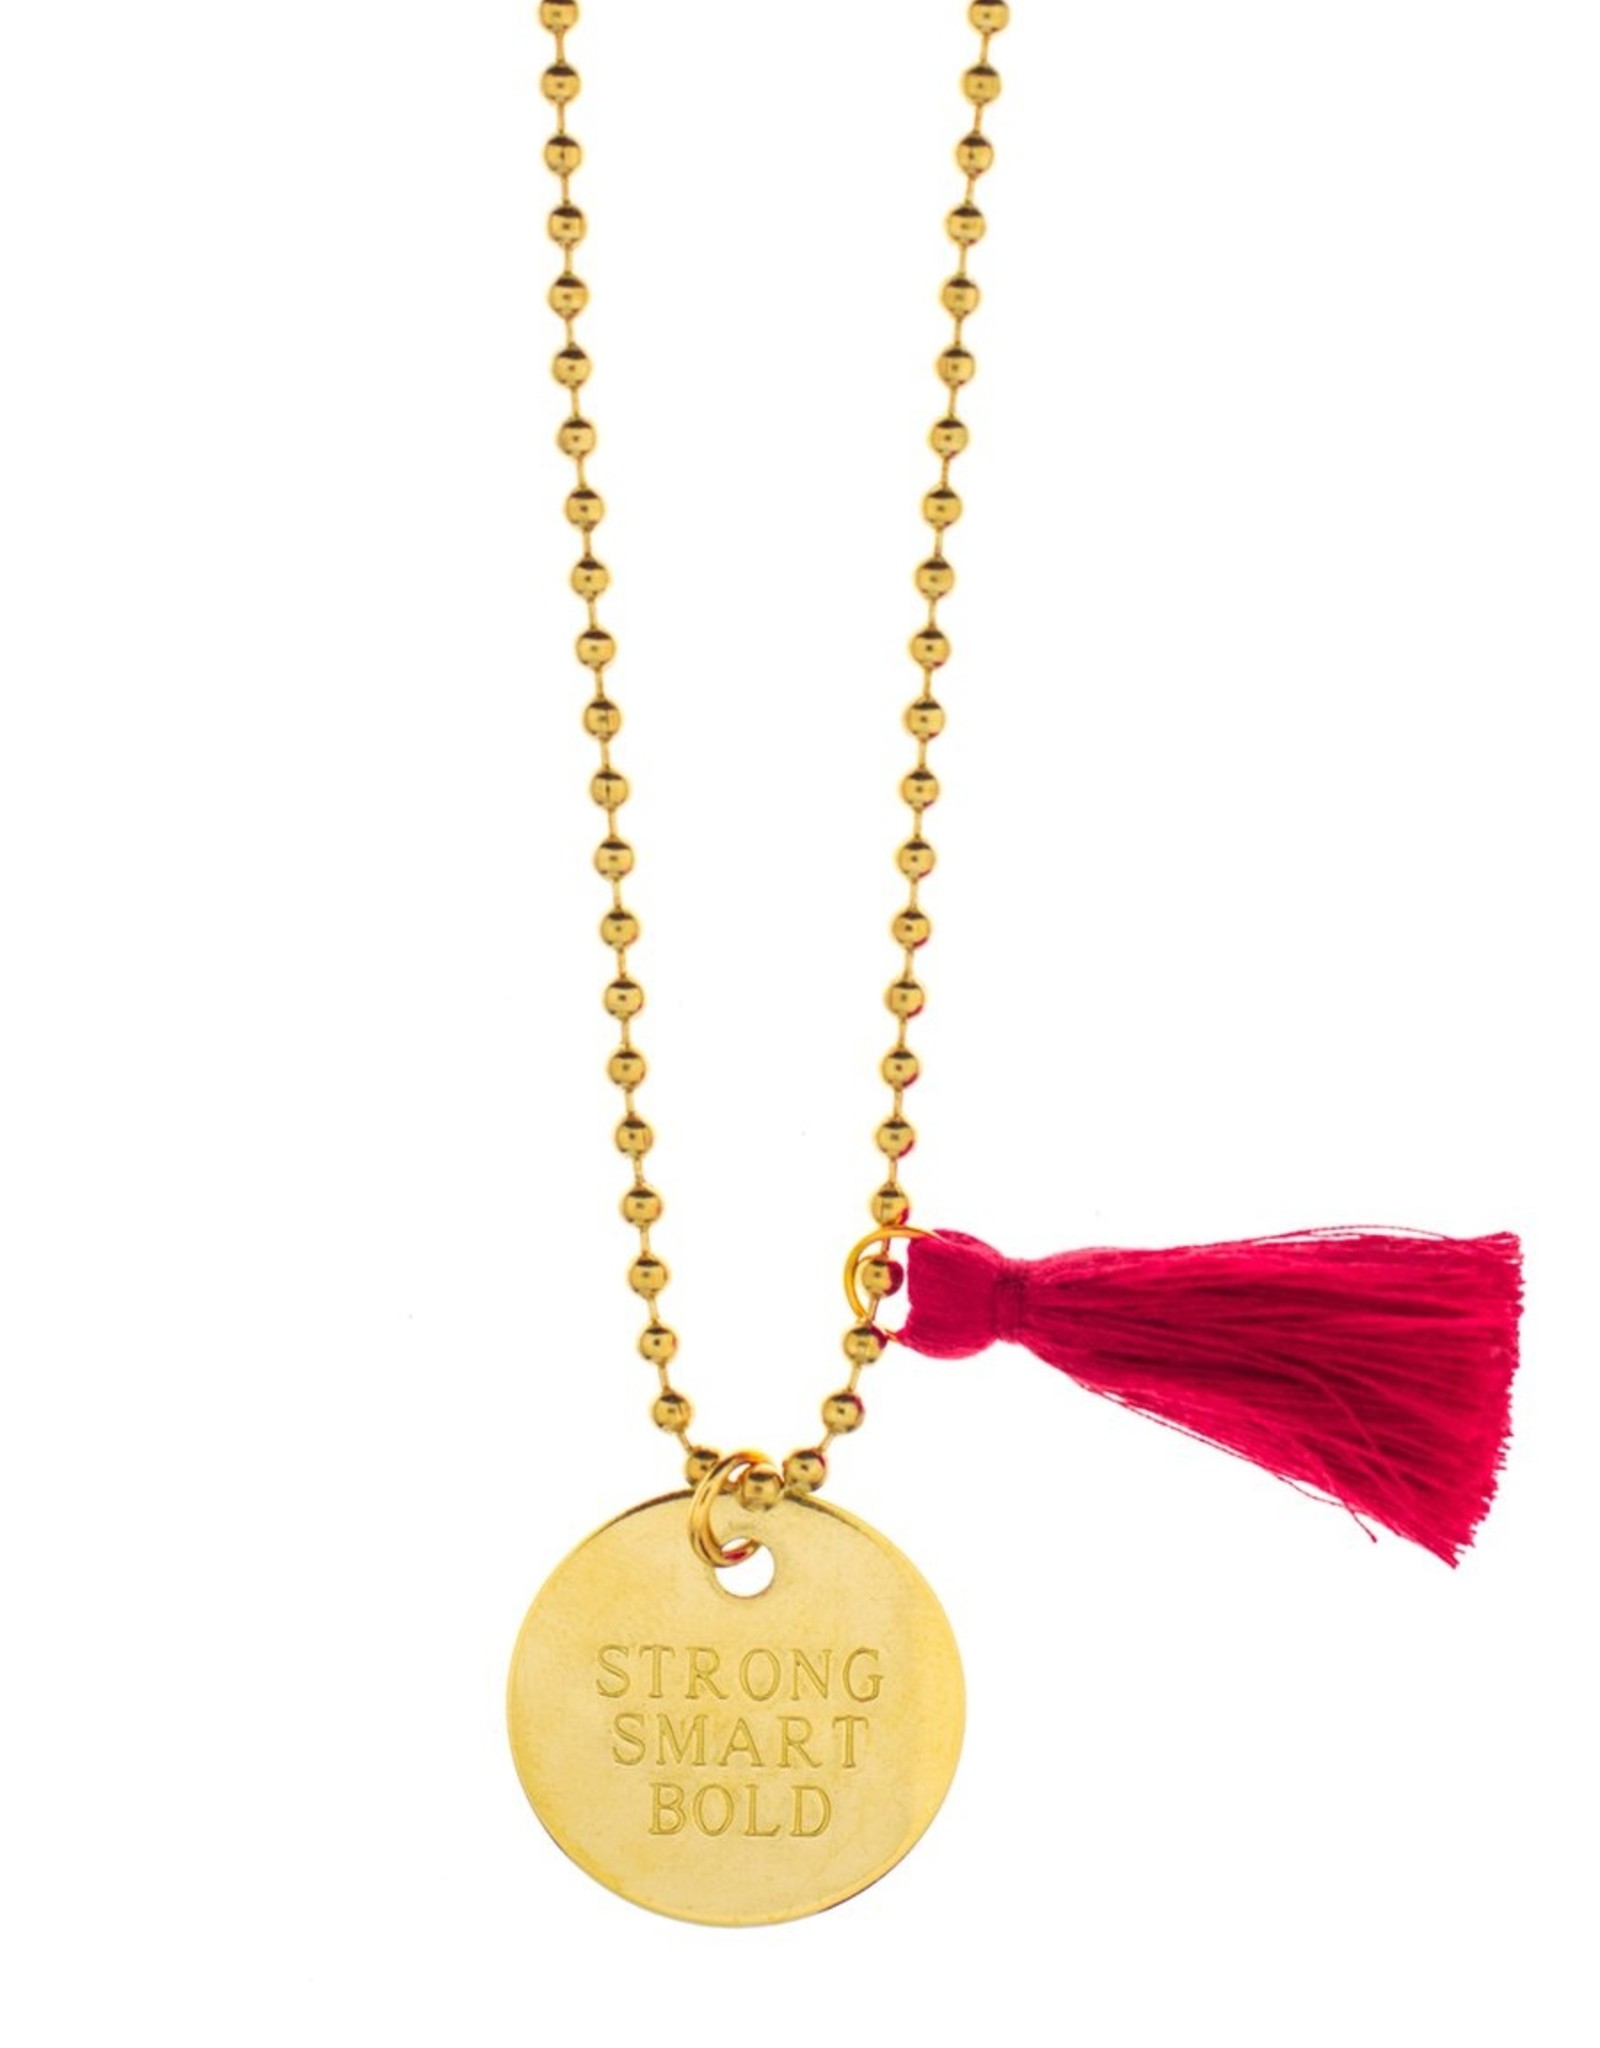 Gunner & Lux Charm Necklace Strong, Smart, Bold